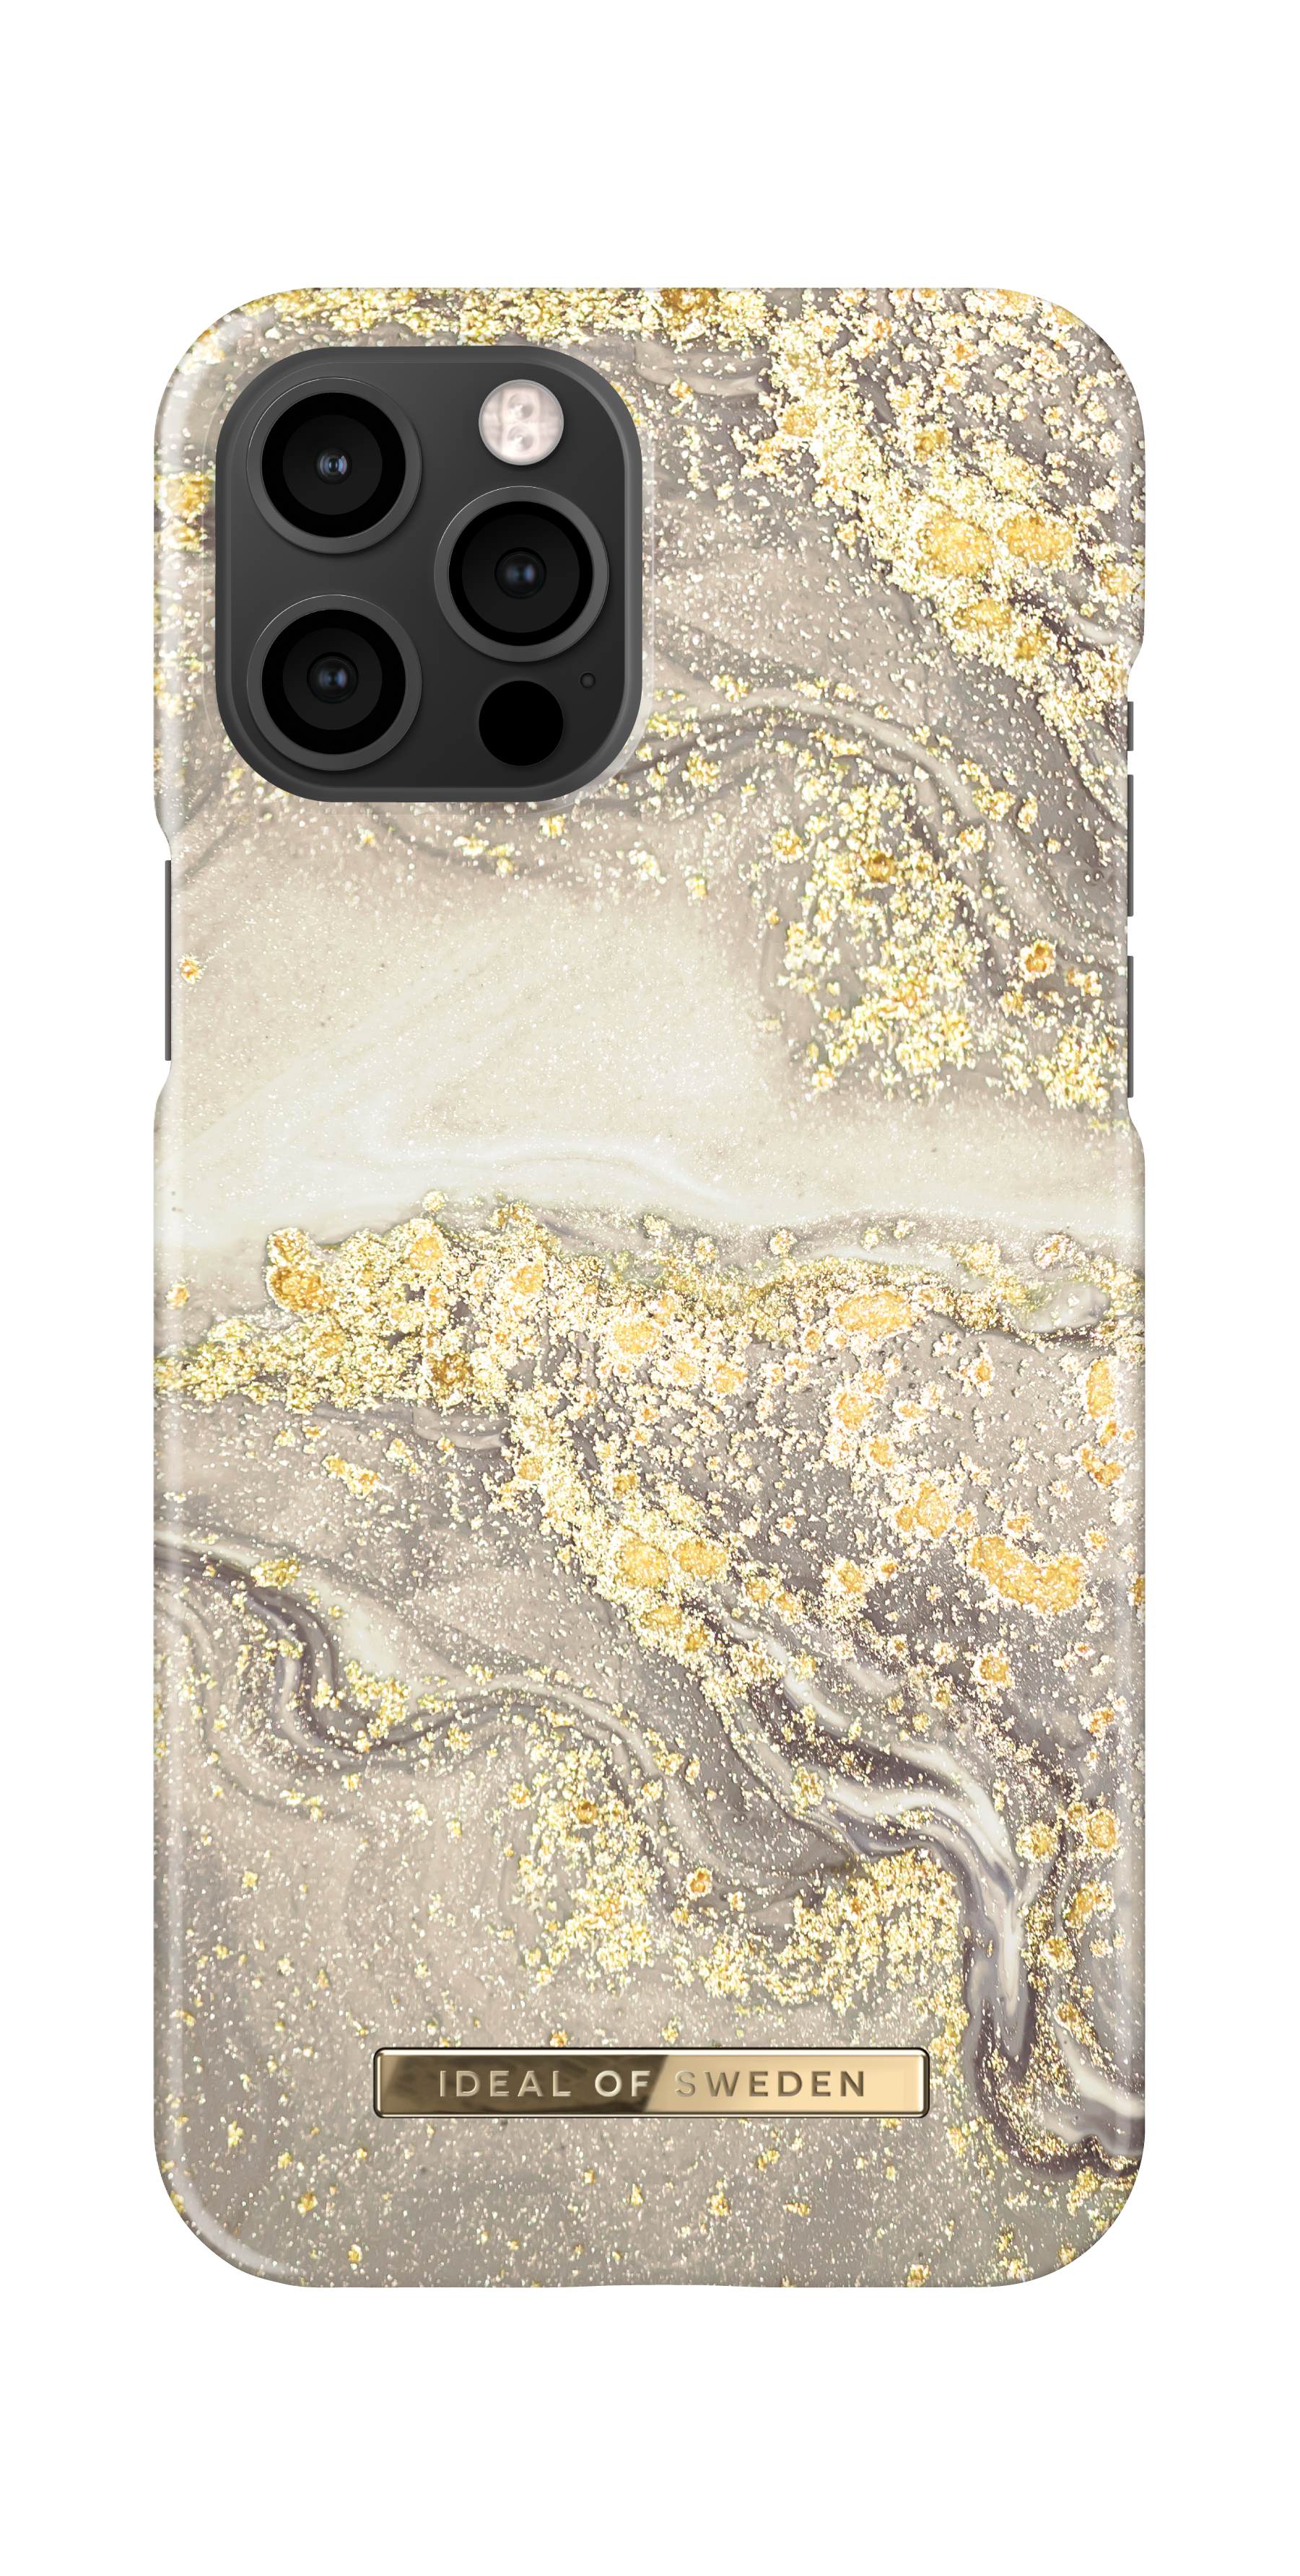 Max, IDEAL Apple, SWEDEN 12 IPhone Greige Pro Backcover, OF Marble IDFCSS19-I2067-121, Sparkle